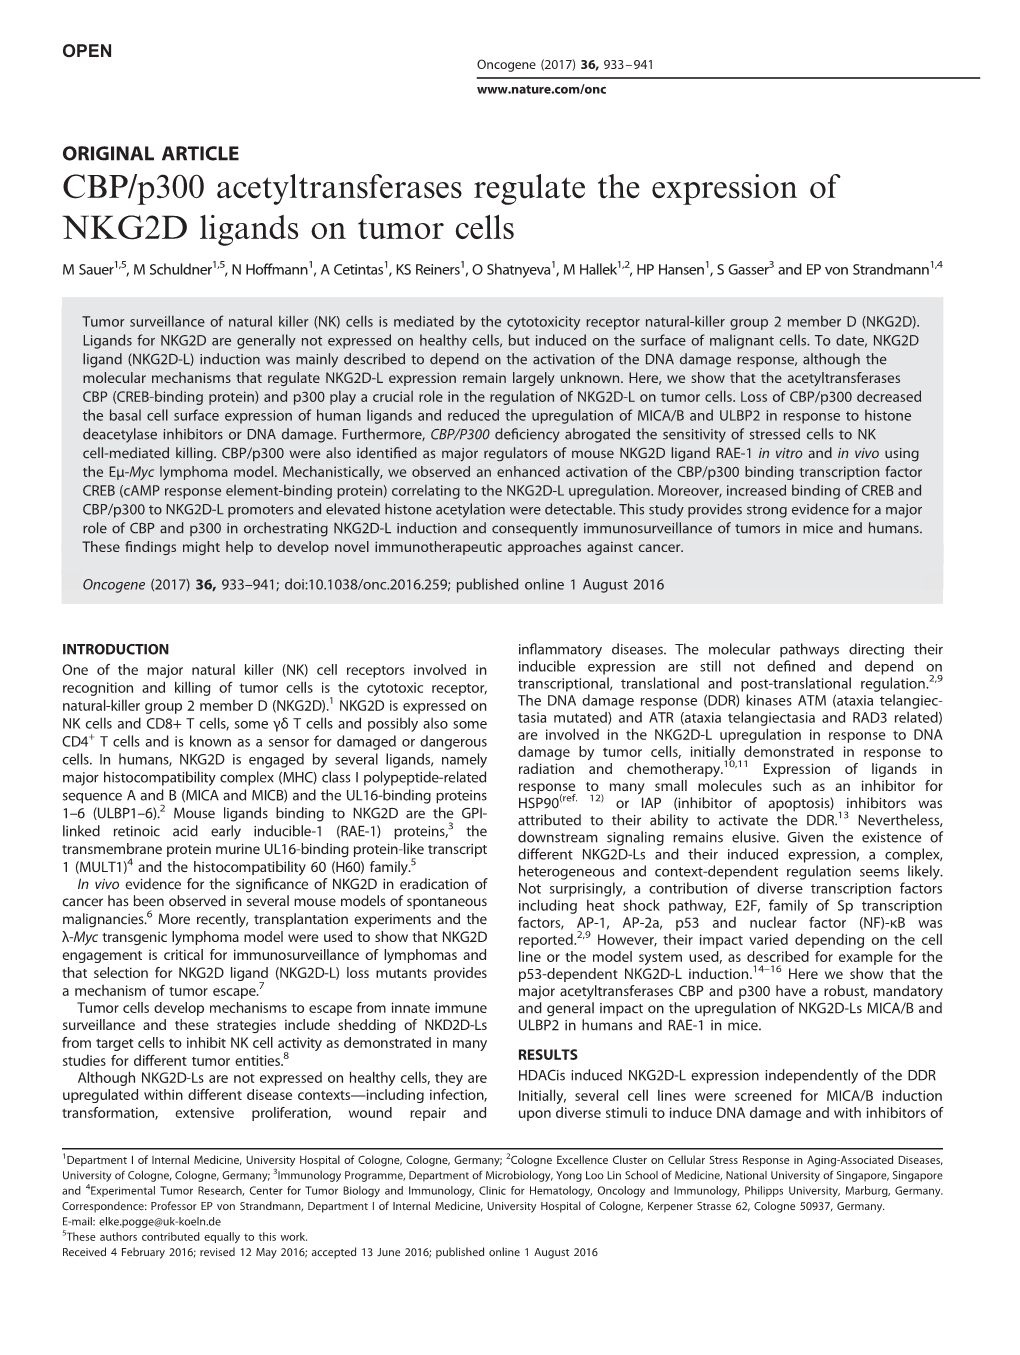 CBP/P300 Acetyltransferases Regulate the Expression of NKG2D Ligands on Tumor Cells